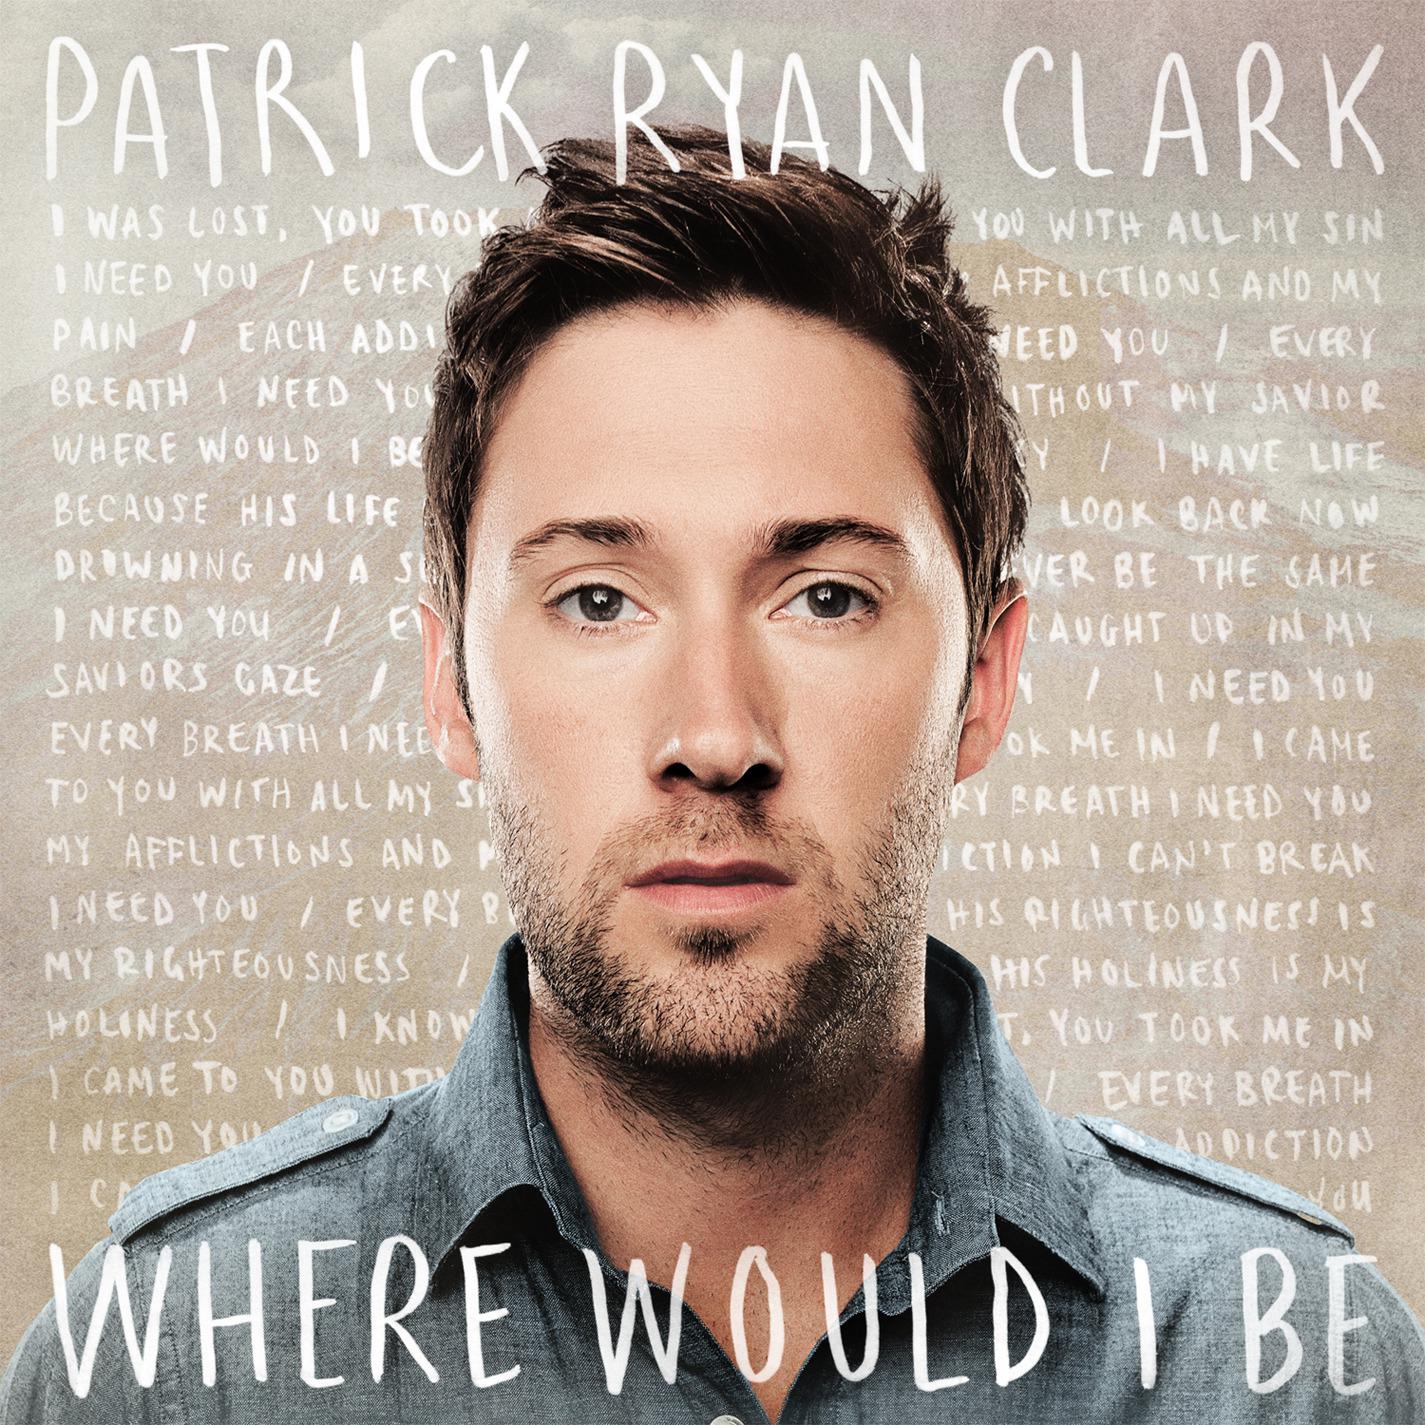 Patrick Ryan Clark - What Was I Fighting For